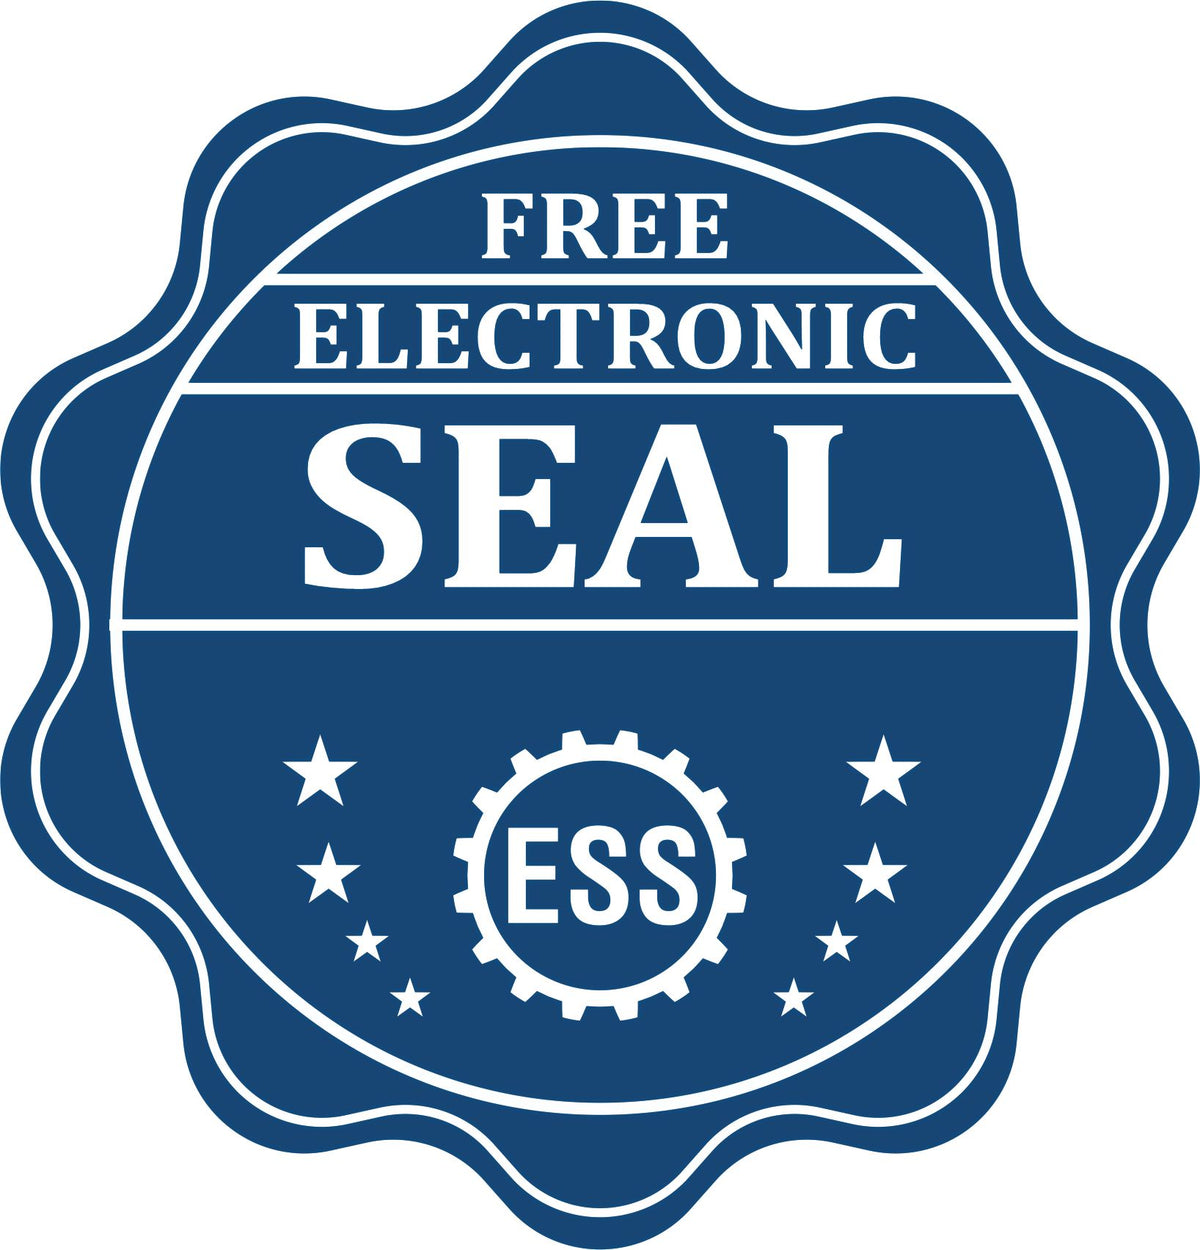 A badge showing a free electronic seal for the Hawaii Engineer Desk Seal with stars and the ESS gear on the emblem.